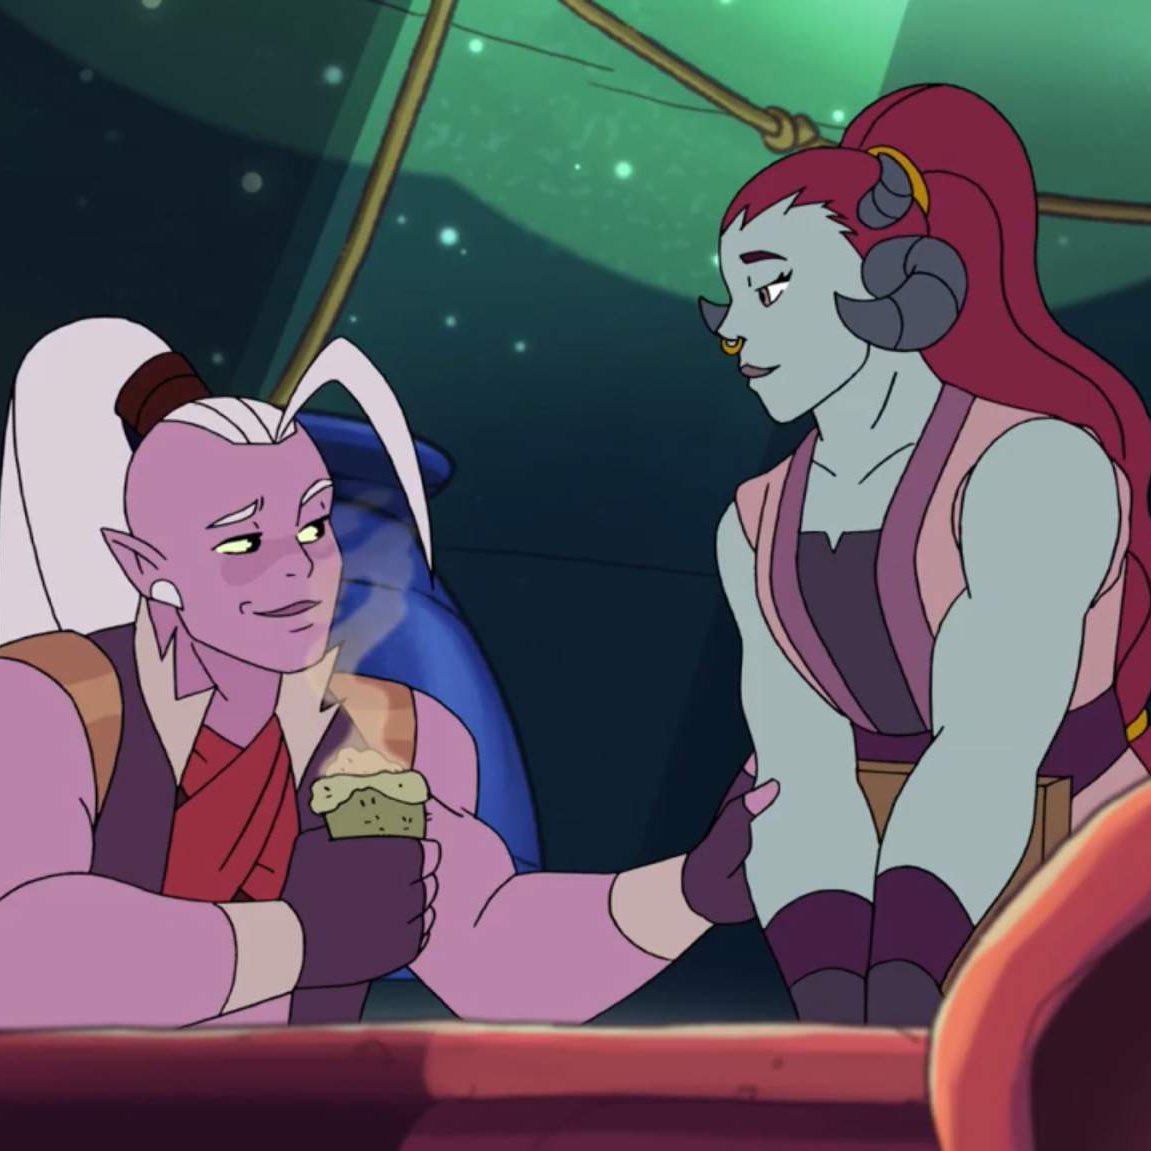 huntara canonically flirted with the bartender and it’s confirmed that adora flirted with huntara